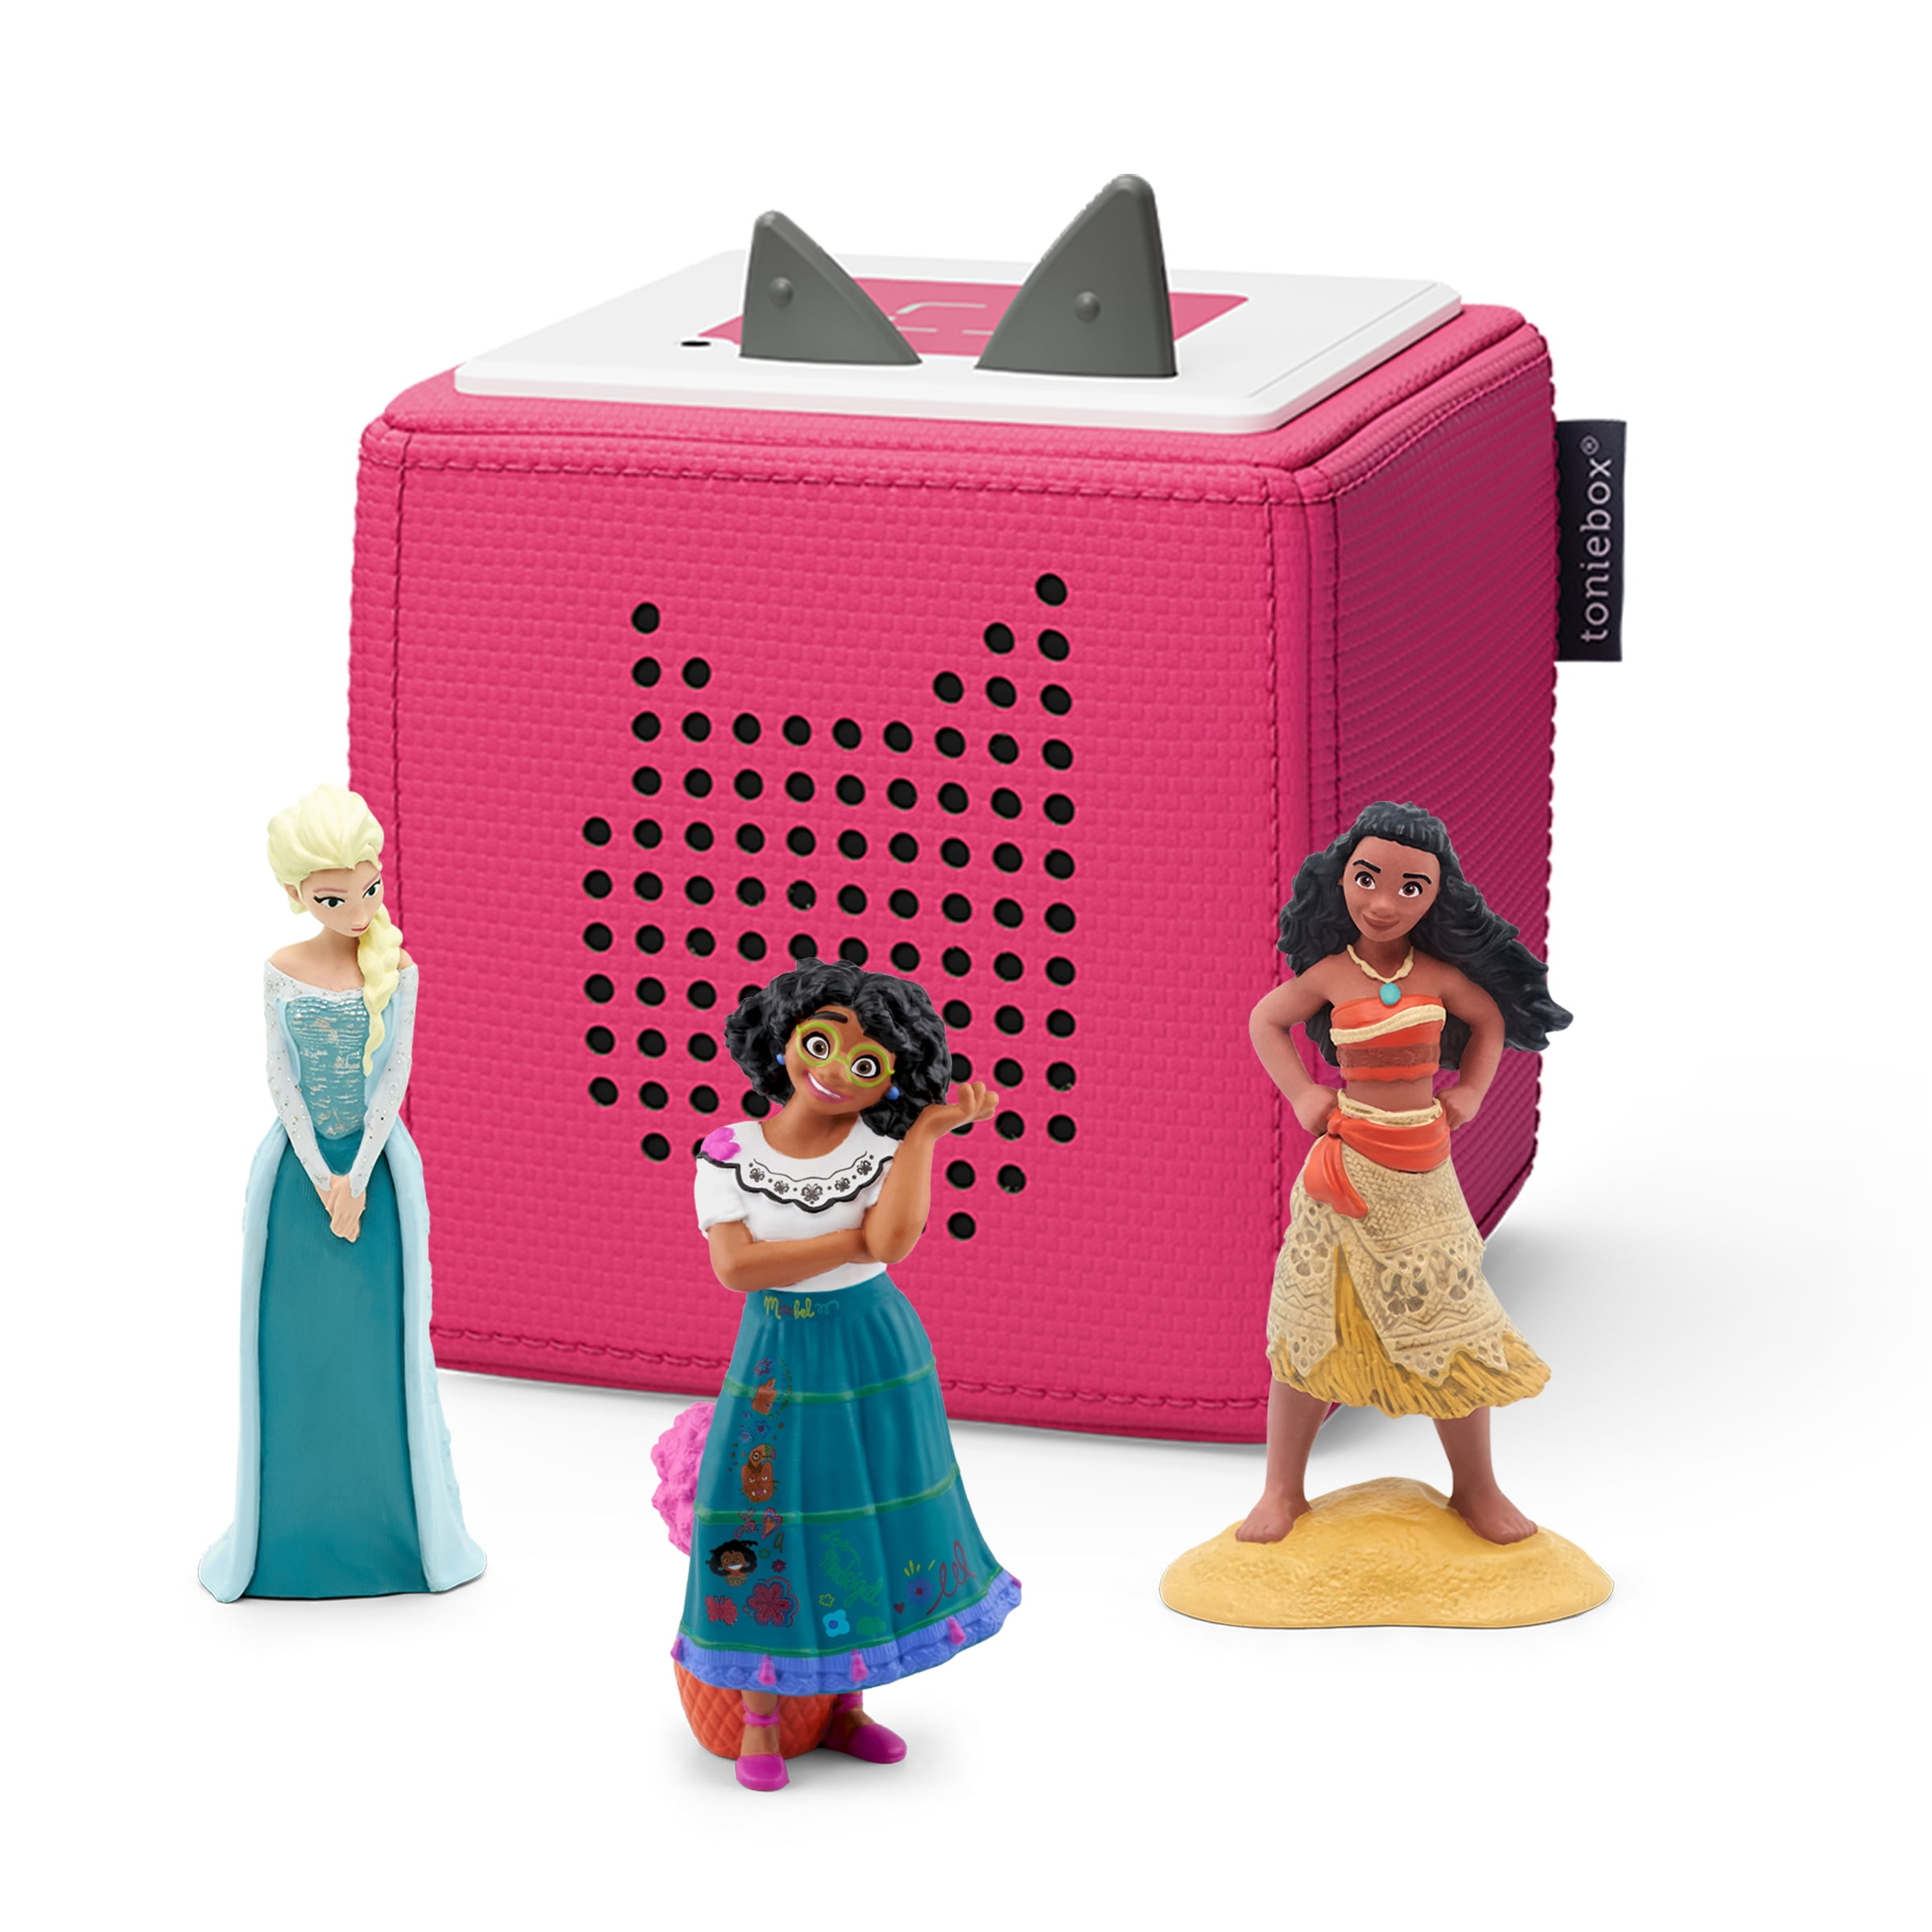 Tonies Disney Toniebox Audio Player Bundle with Elsa, Moana, and Mirabel,  Multicolor, Weight: 3 lbs